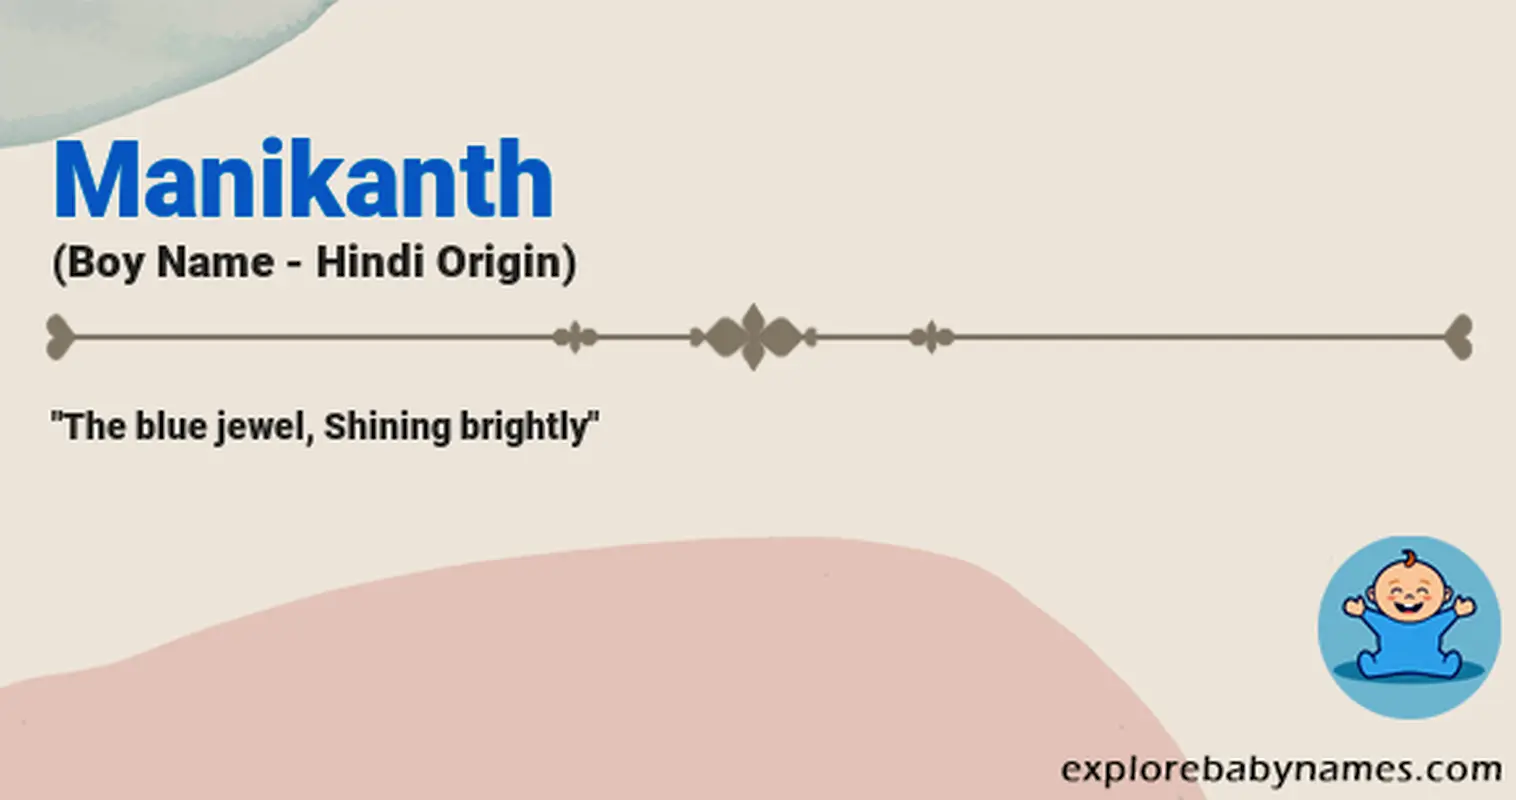 Meaning of Manikanth